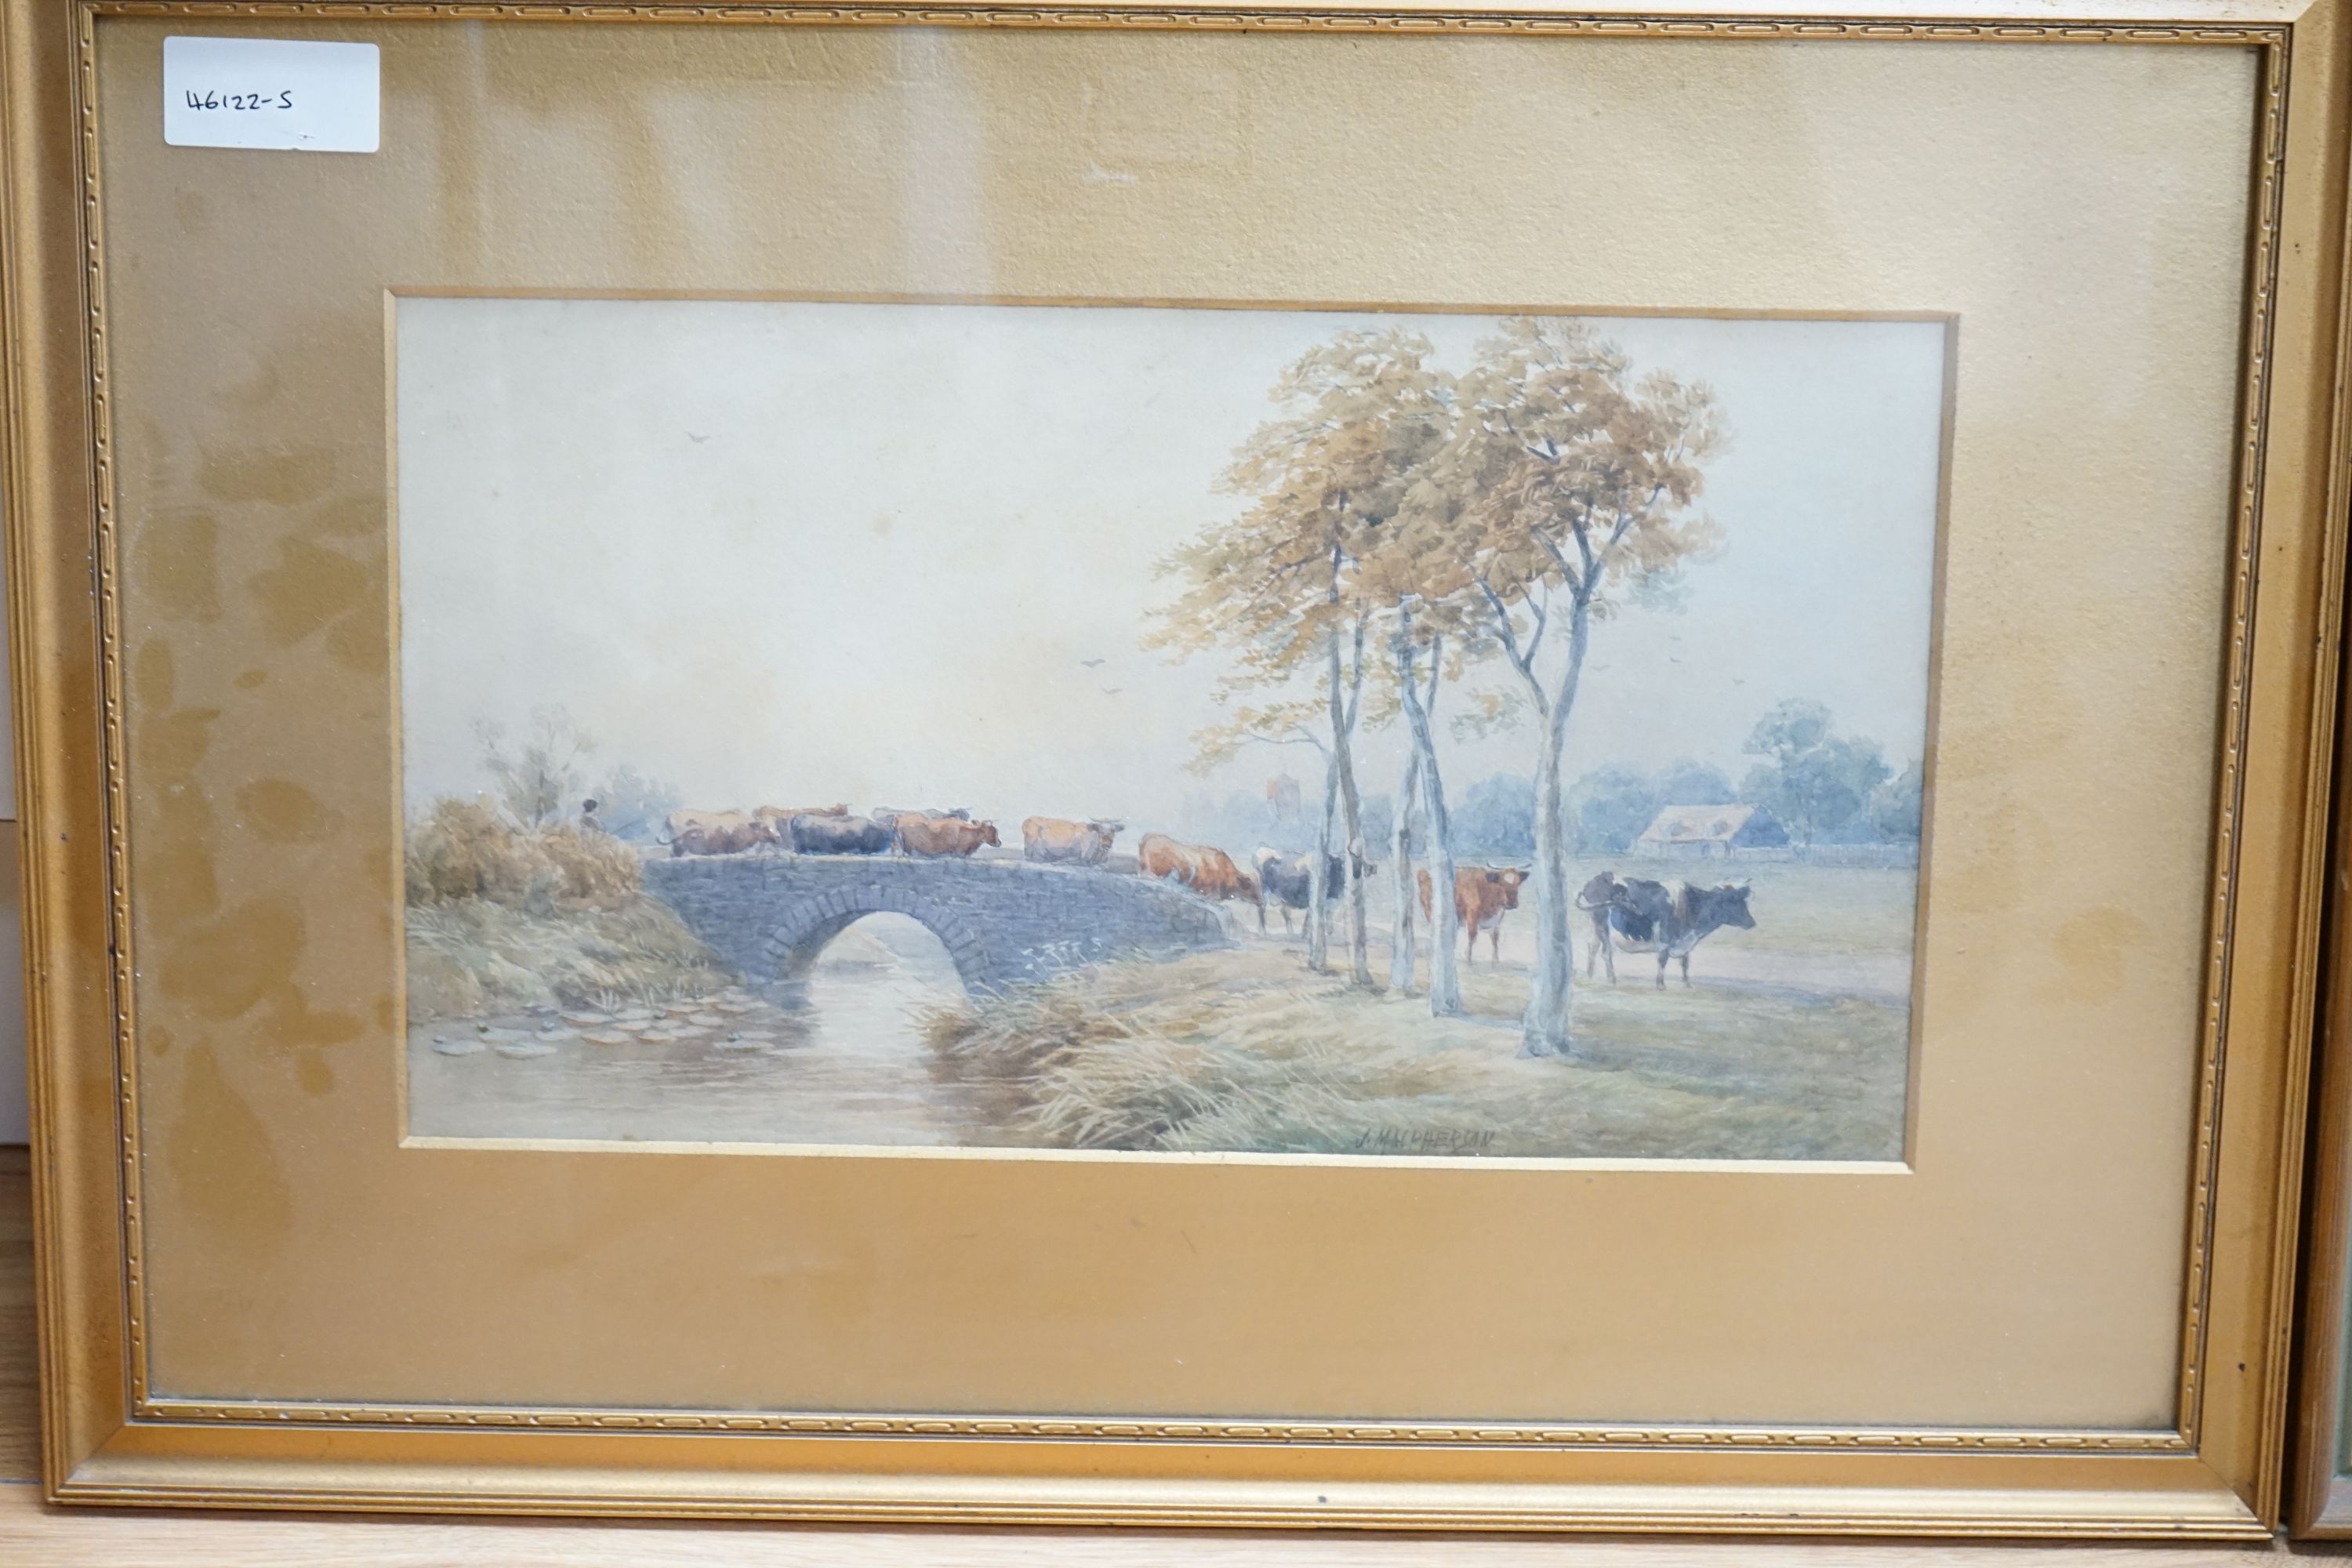 John Macpherson (Scottish, fl.1865-1884), watercolour, Cattle and drover crossing a bridge, signed, 21 x 37cm, with two other watercolours, Riverscape and Figures beside the Thames at Chelsea